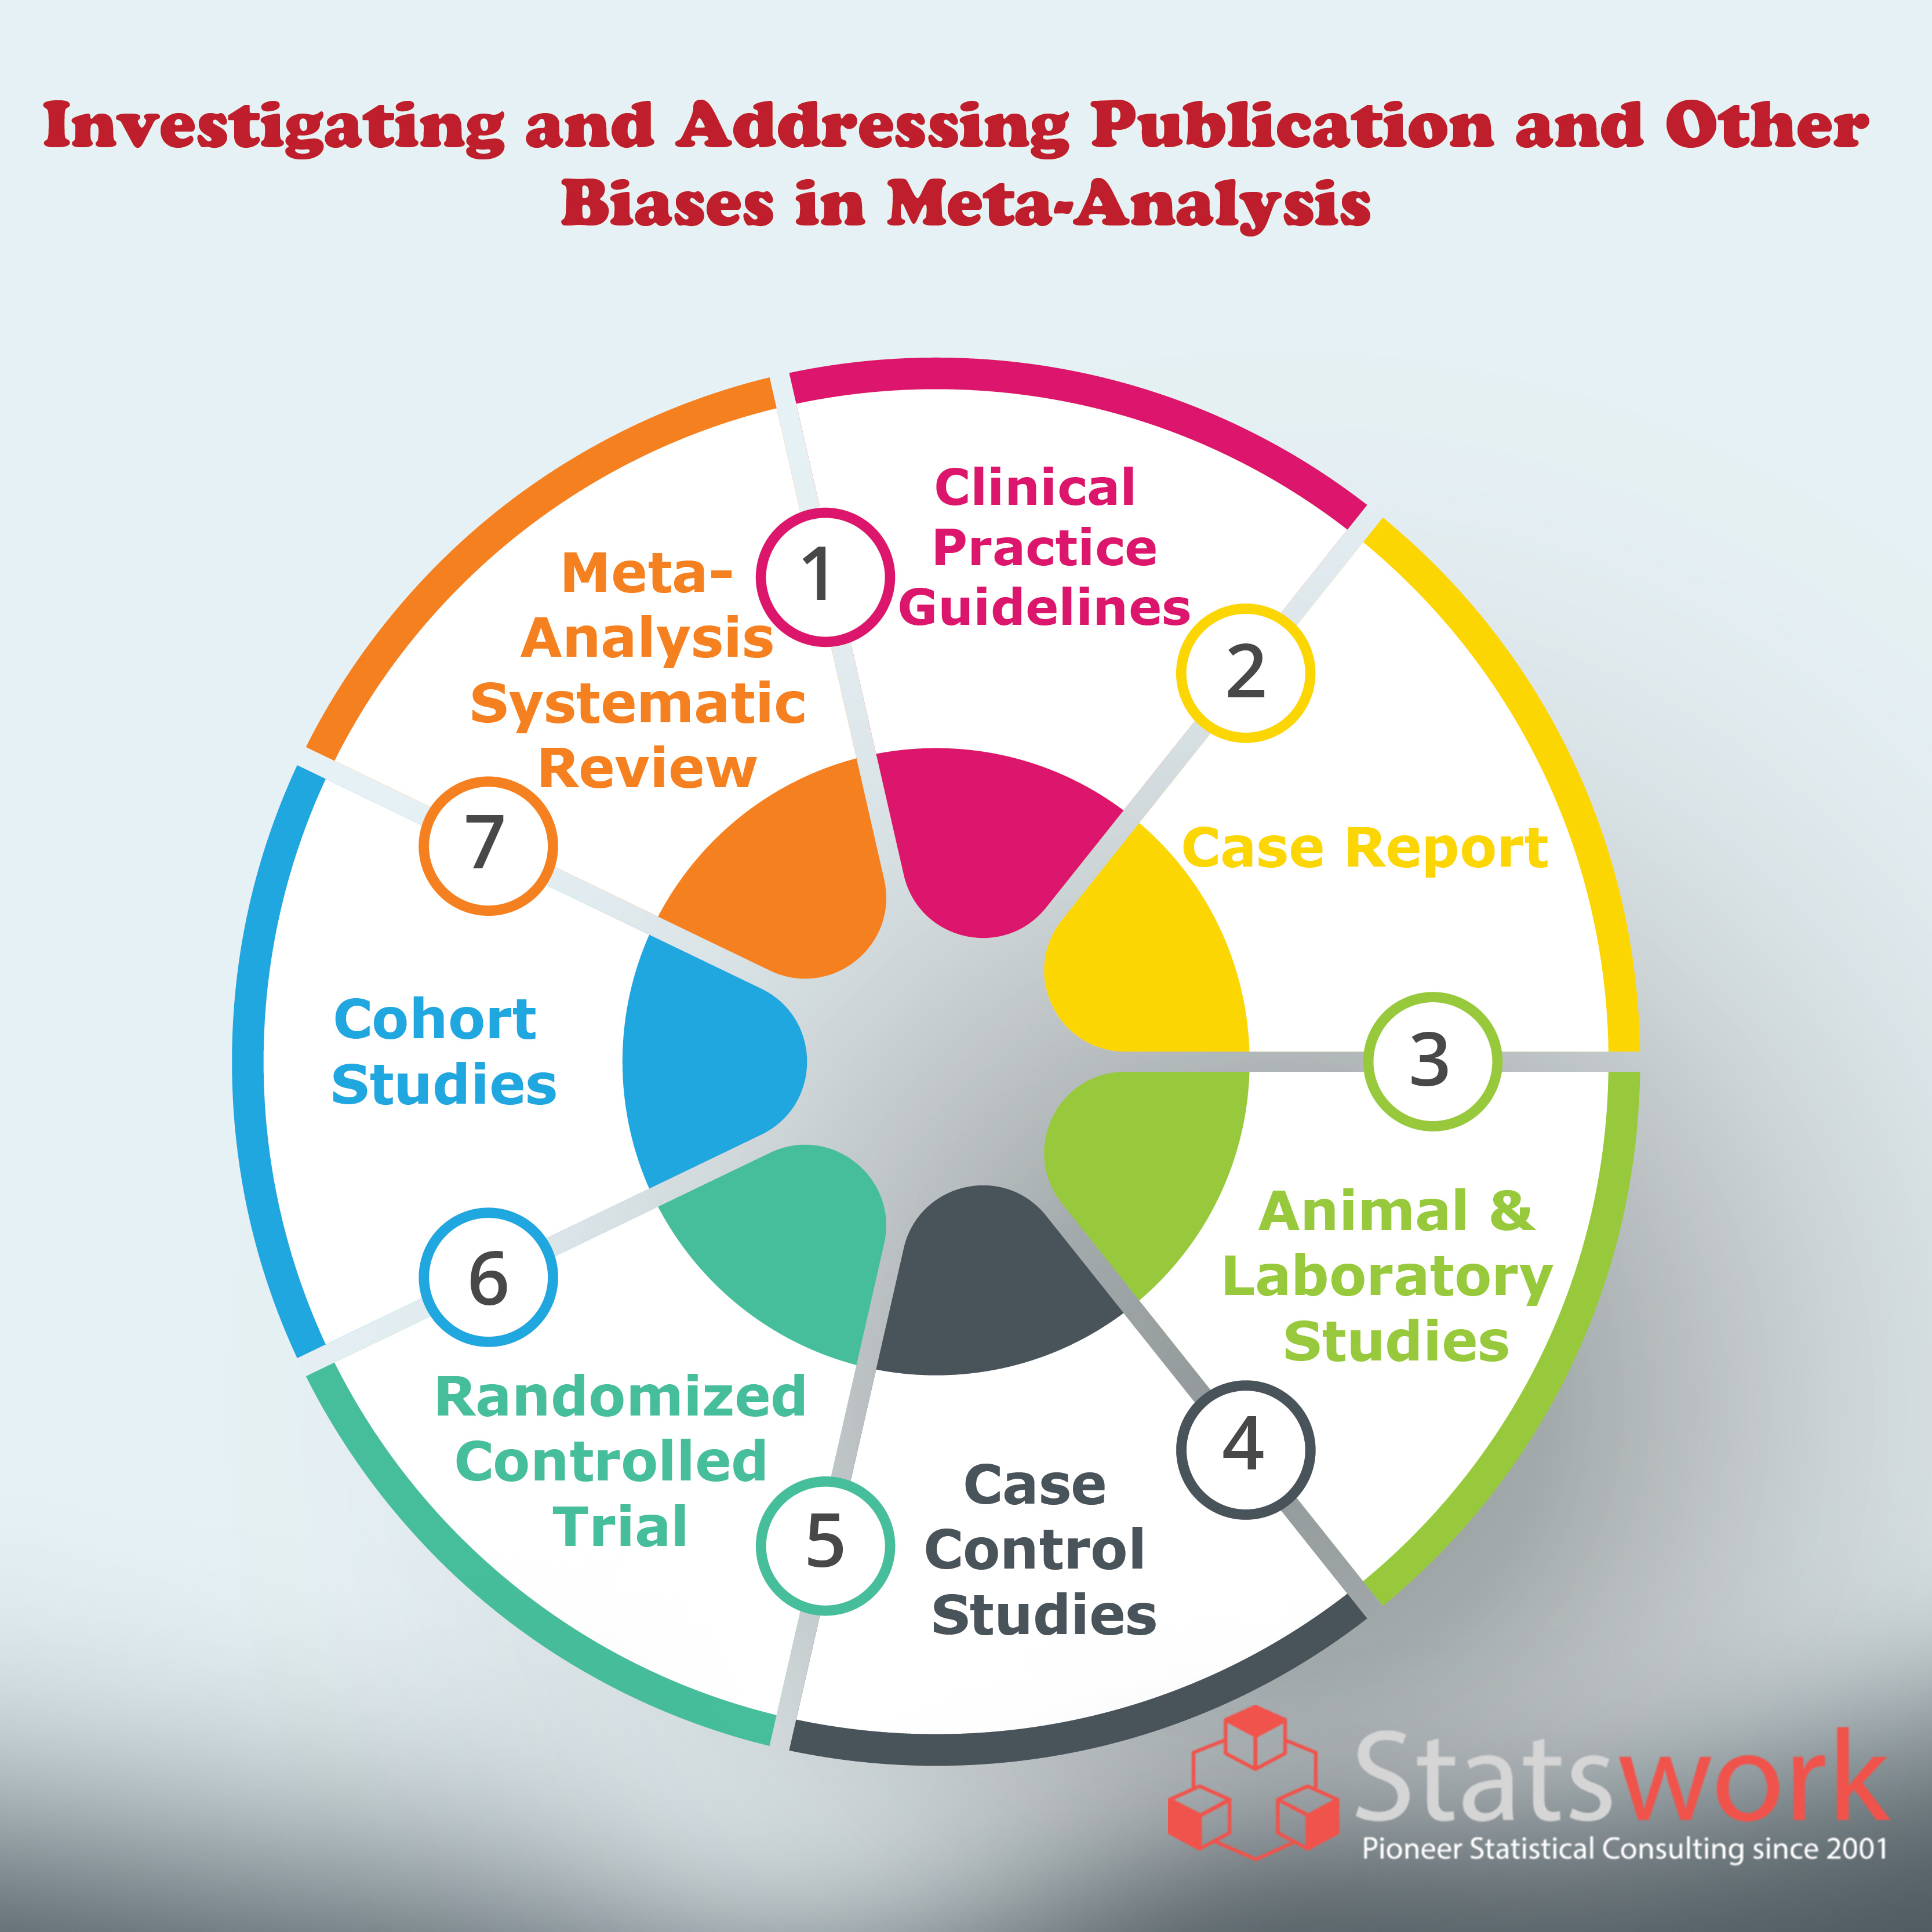 Investigating and addressing publication and other biases in meta-analysis